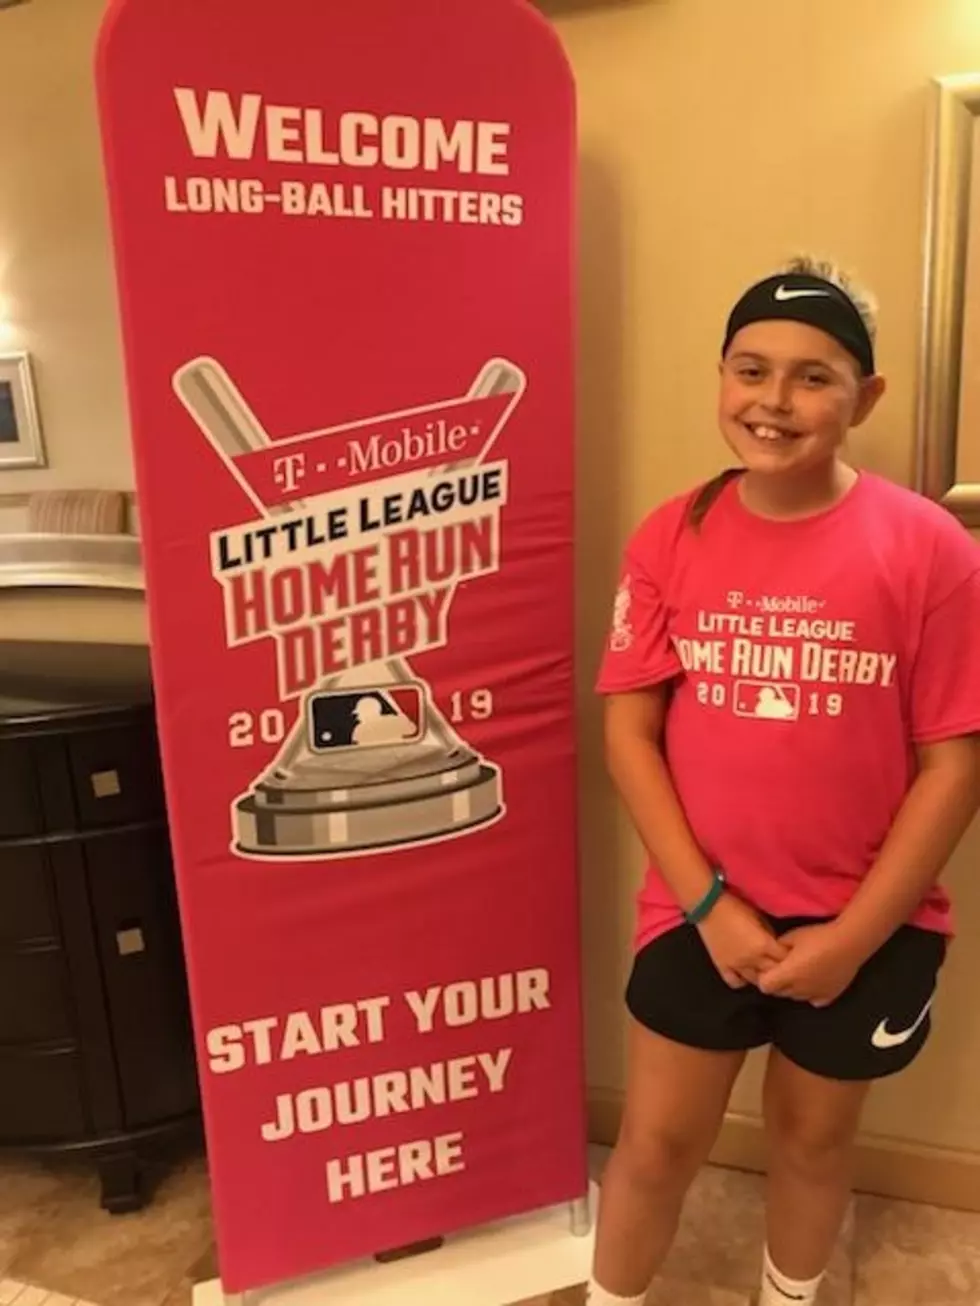 Local Girl Competes In LLWS Home Run Derby